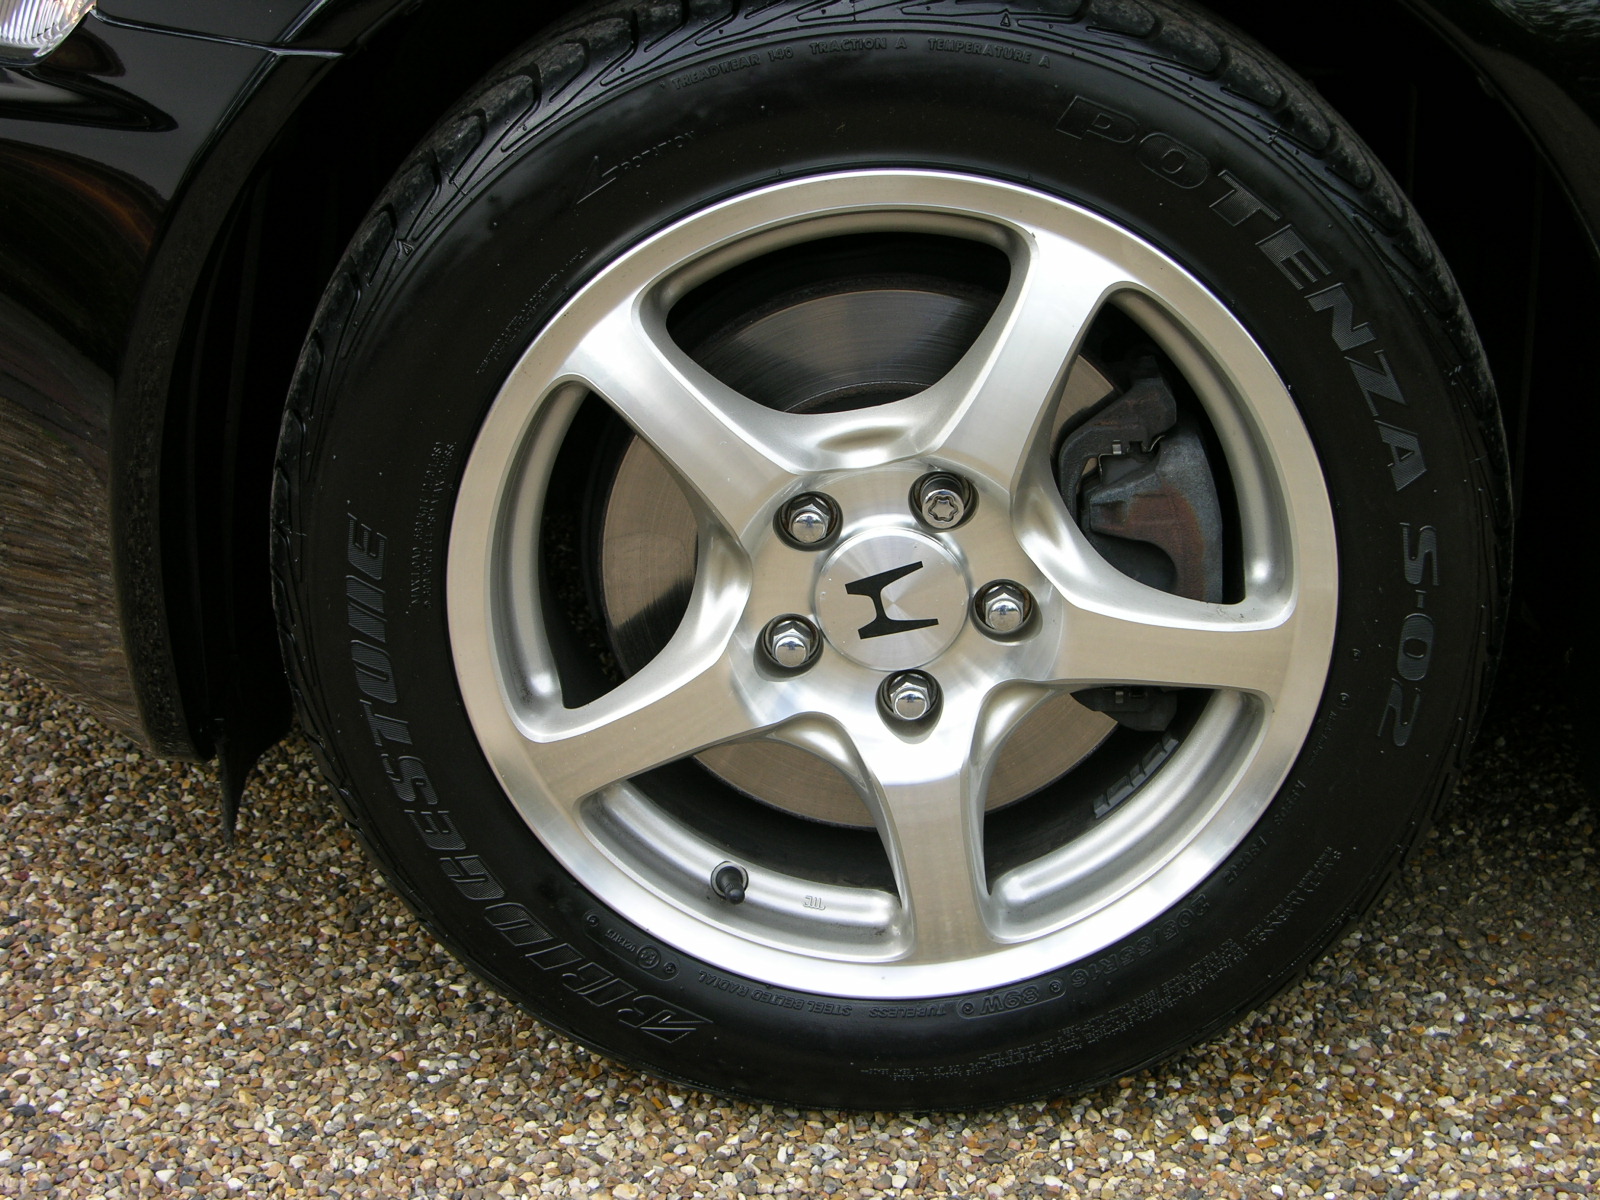 a close up view of the wheel and tire of a car